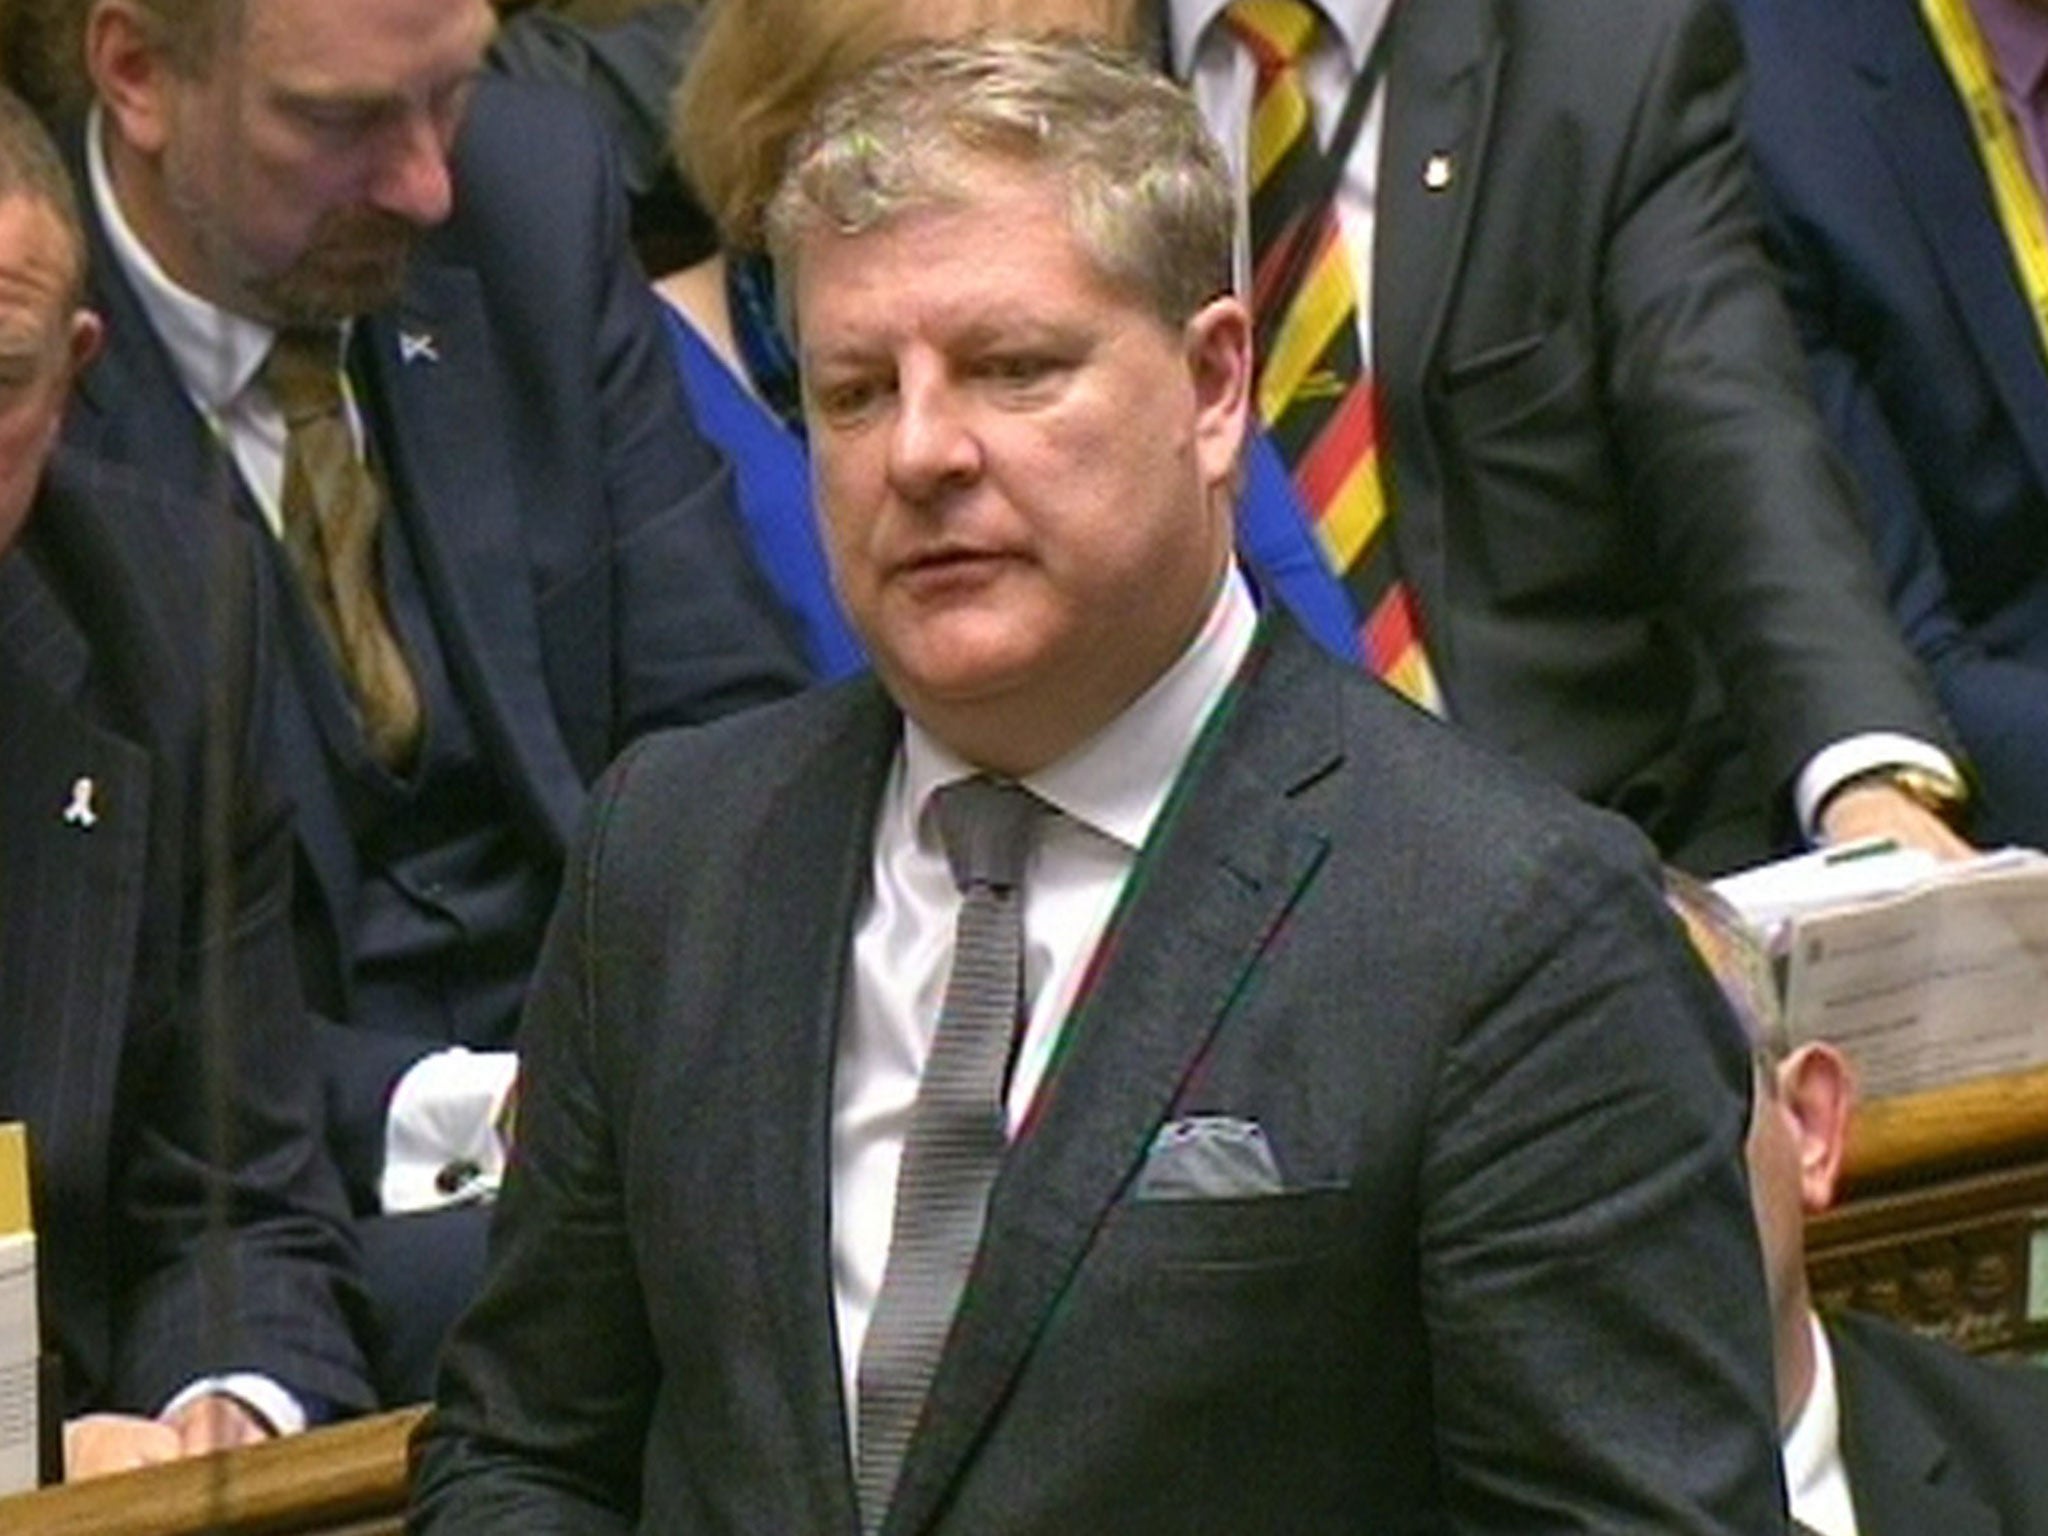 SNP Westminster leader Angus Robertson speaking during the debate in the House of Commons on extending the bombing campaign against Islamic State to Syria